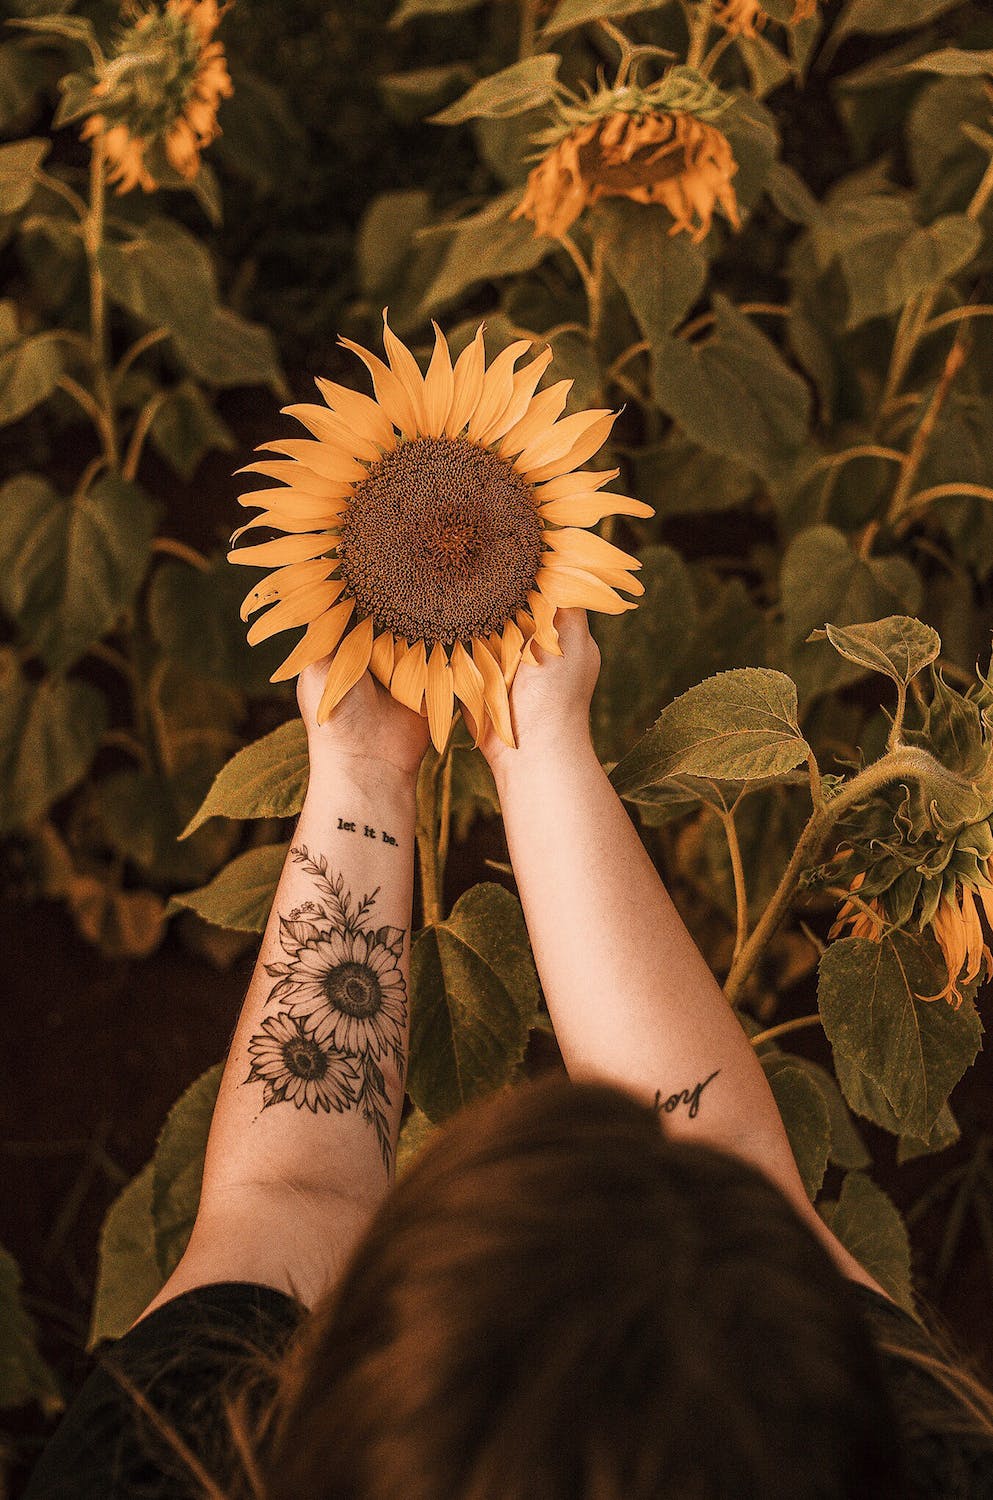 Girl with forearm tattoo looking down and holding a beautiful sunflower in a sunflower field.